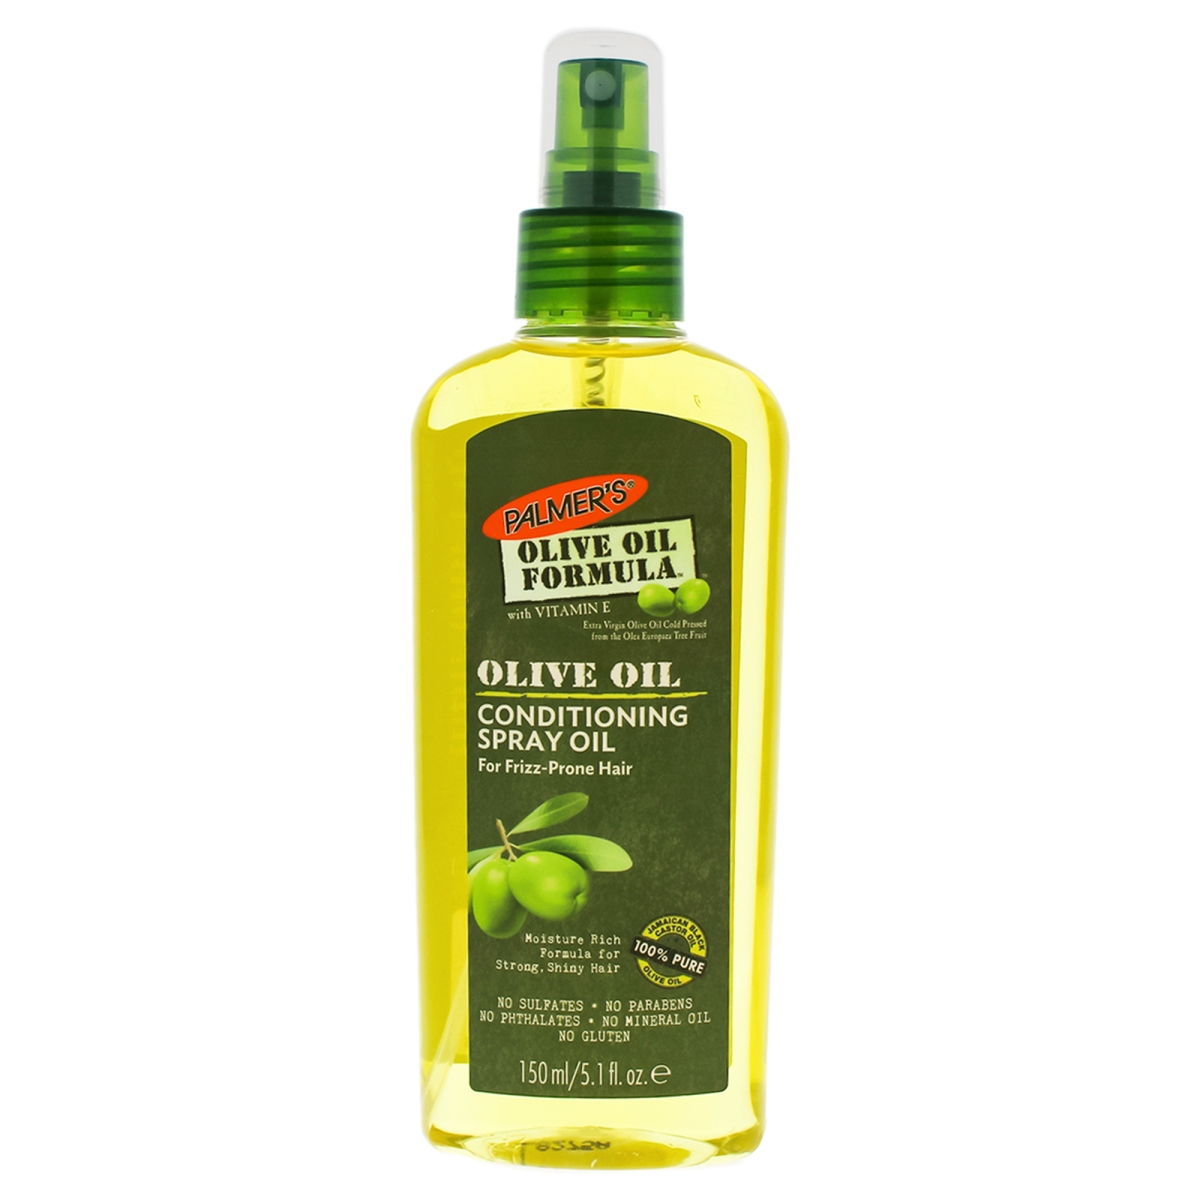 I0088450 Olive Oil Conditioning Hair Spray Oil For Unisex - 5.1 Oz